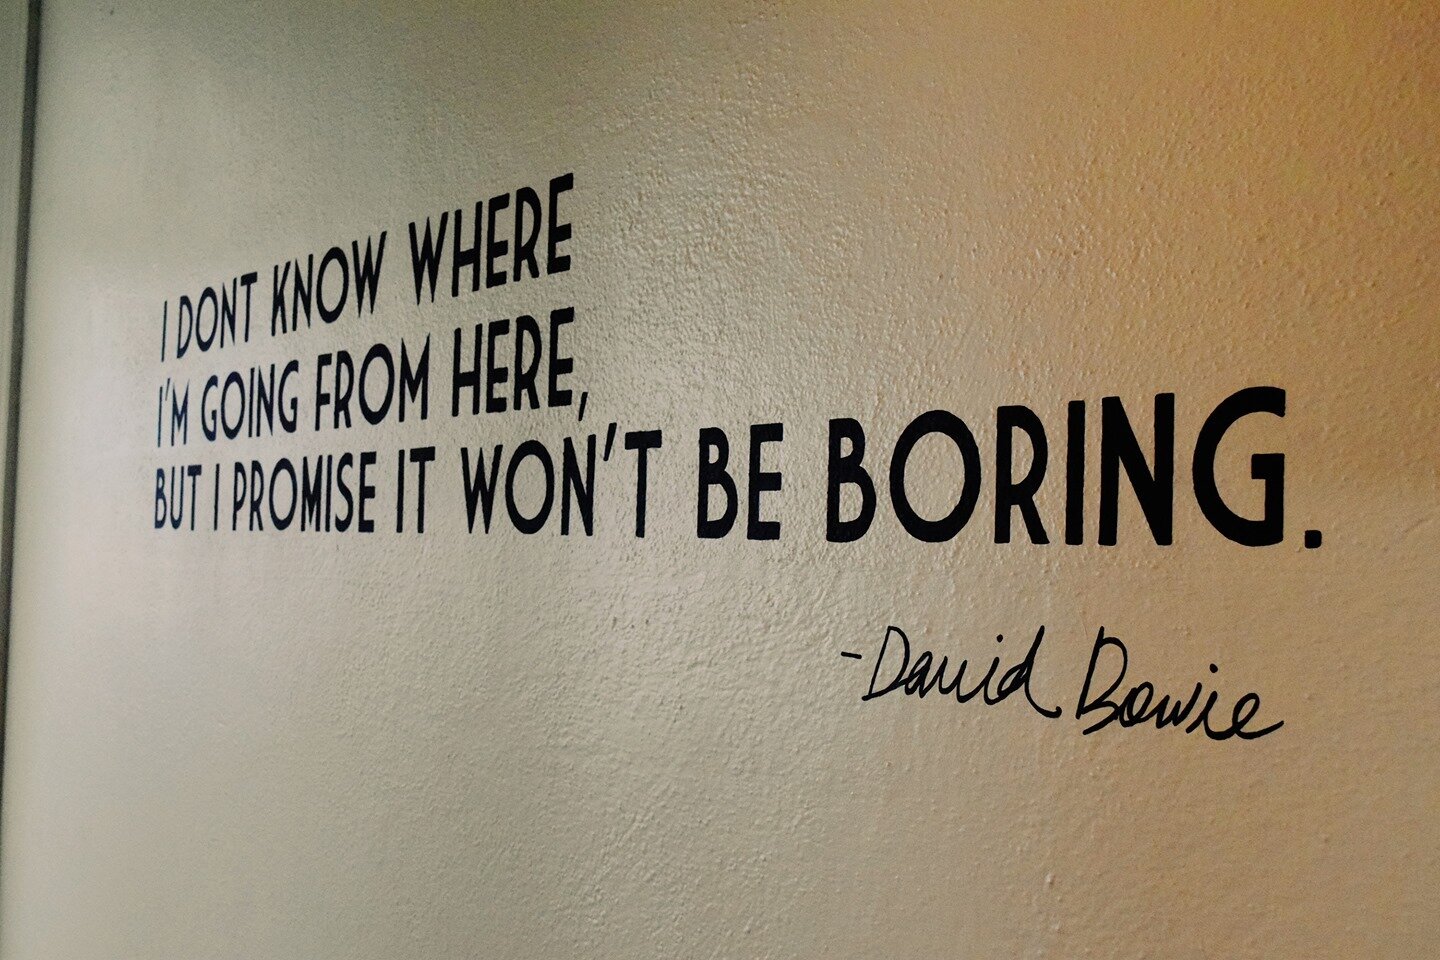 Bowie motivation is the best kind of motivation.🔥
#coworking
#paramountsecondfloor
#cheyennewyoming